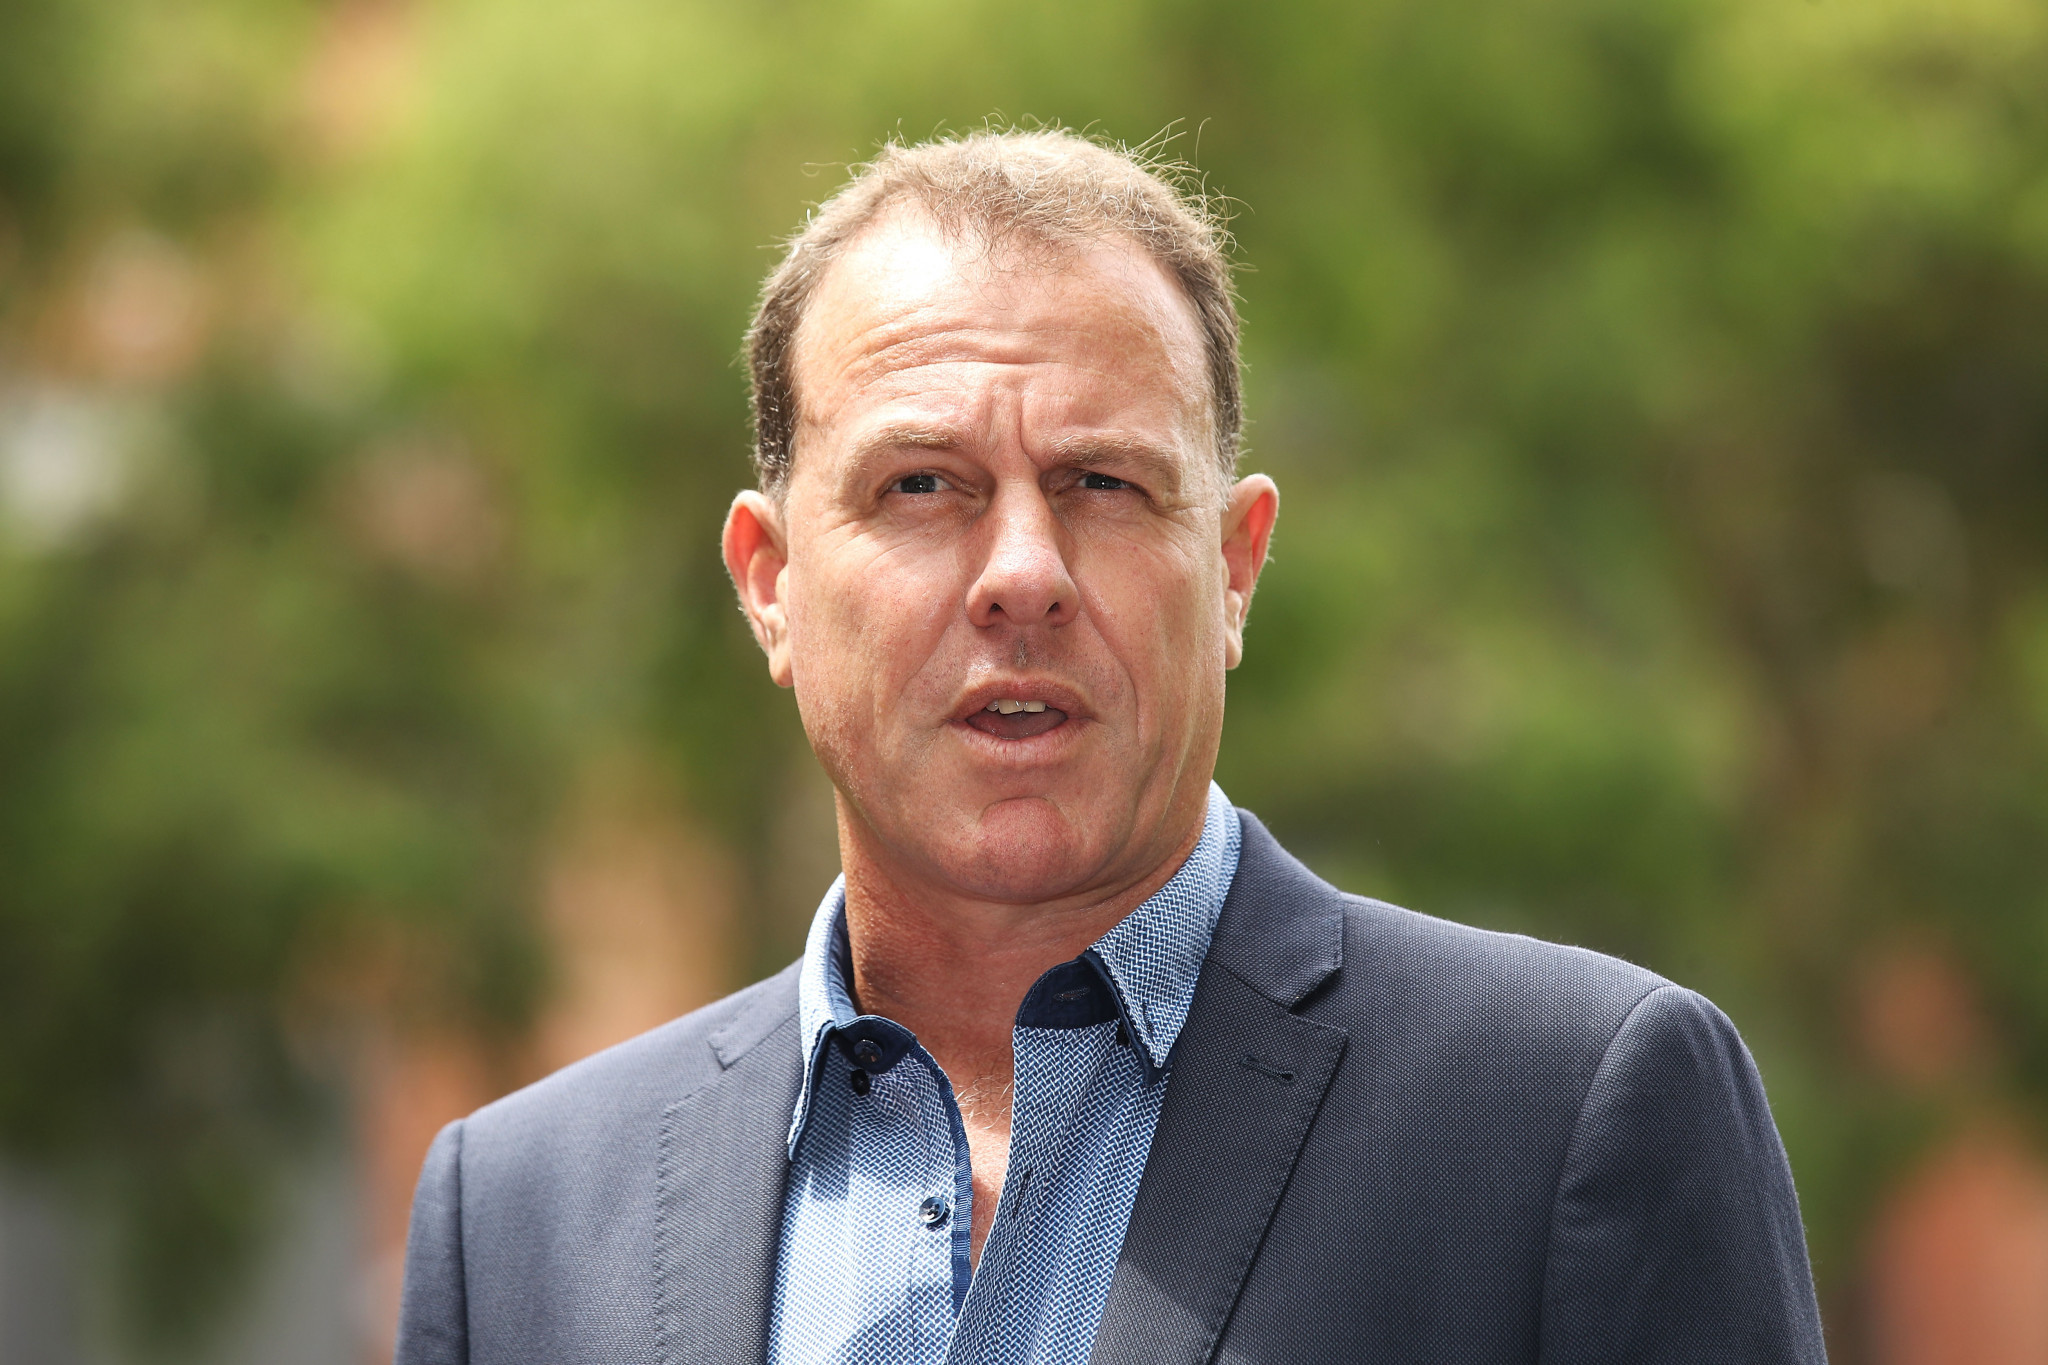 Australia's preparations for this year's FIFA Women's World Cup have been plunged into crisis after the country's football association sacked head coach Alen Stajcic ©Getty Images